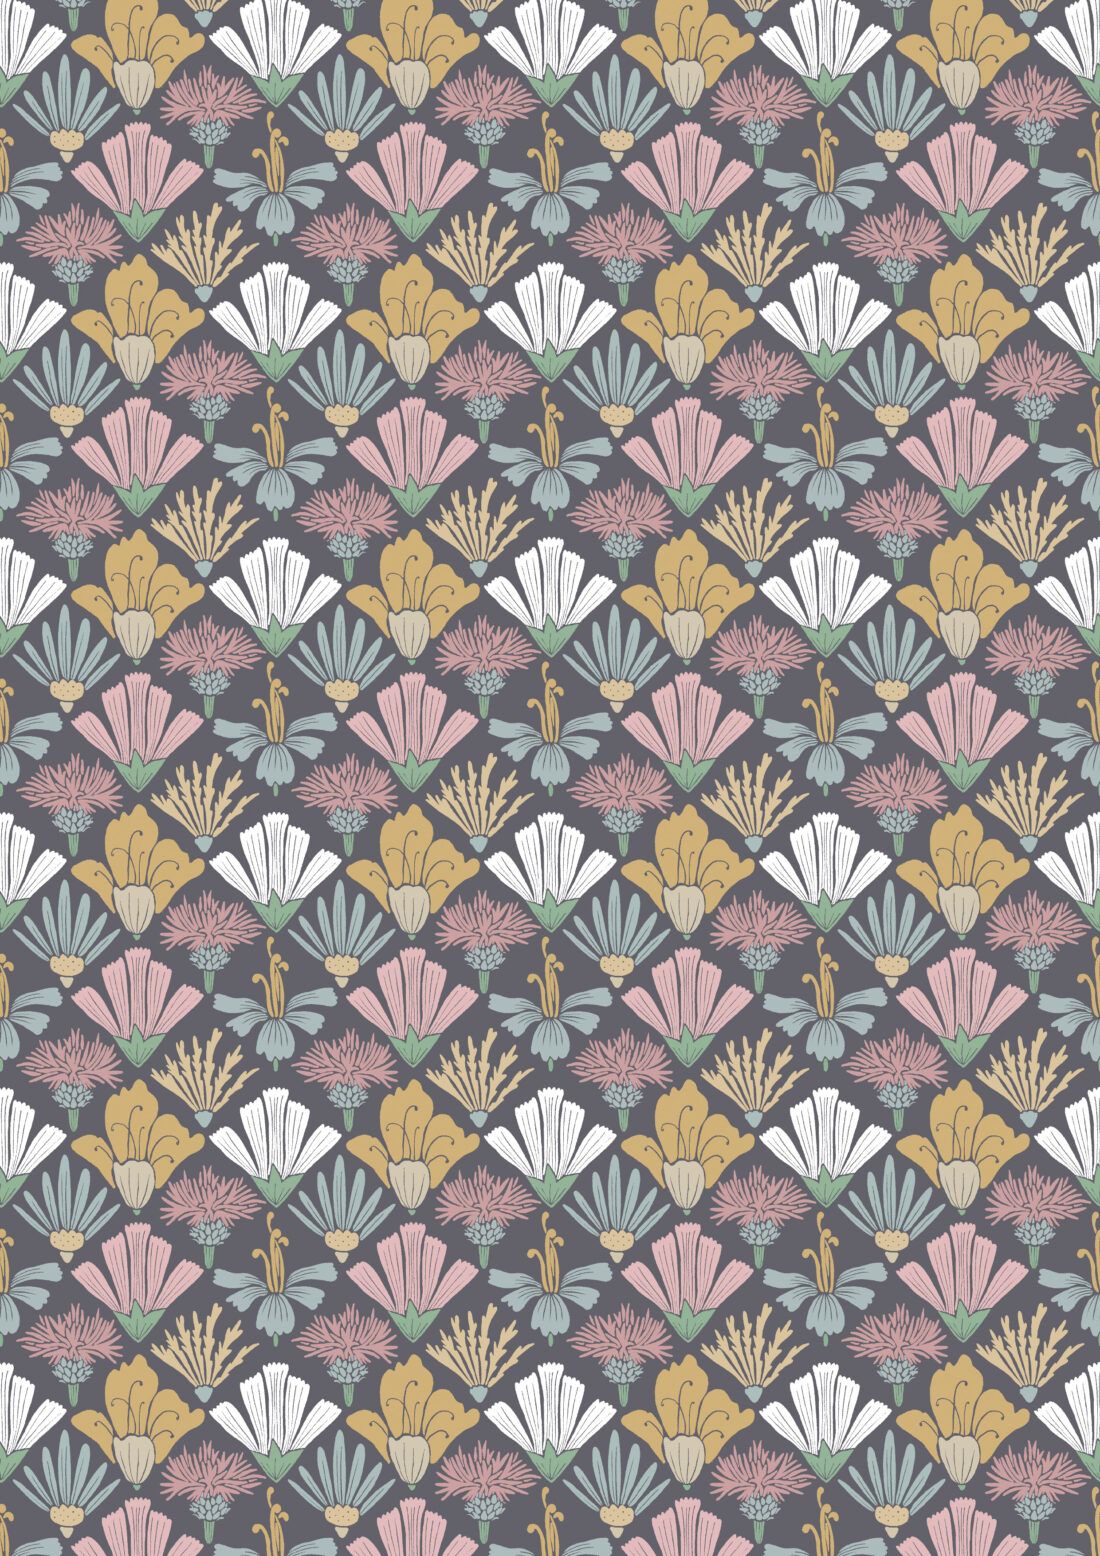 In The Bloom Collection - Wallpaper Republic - Corsage Wallpaper - Colorway: Multi - Swatch